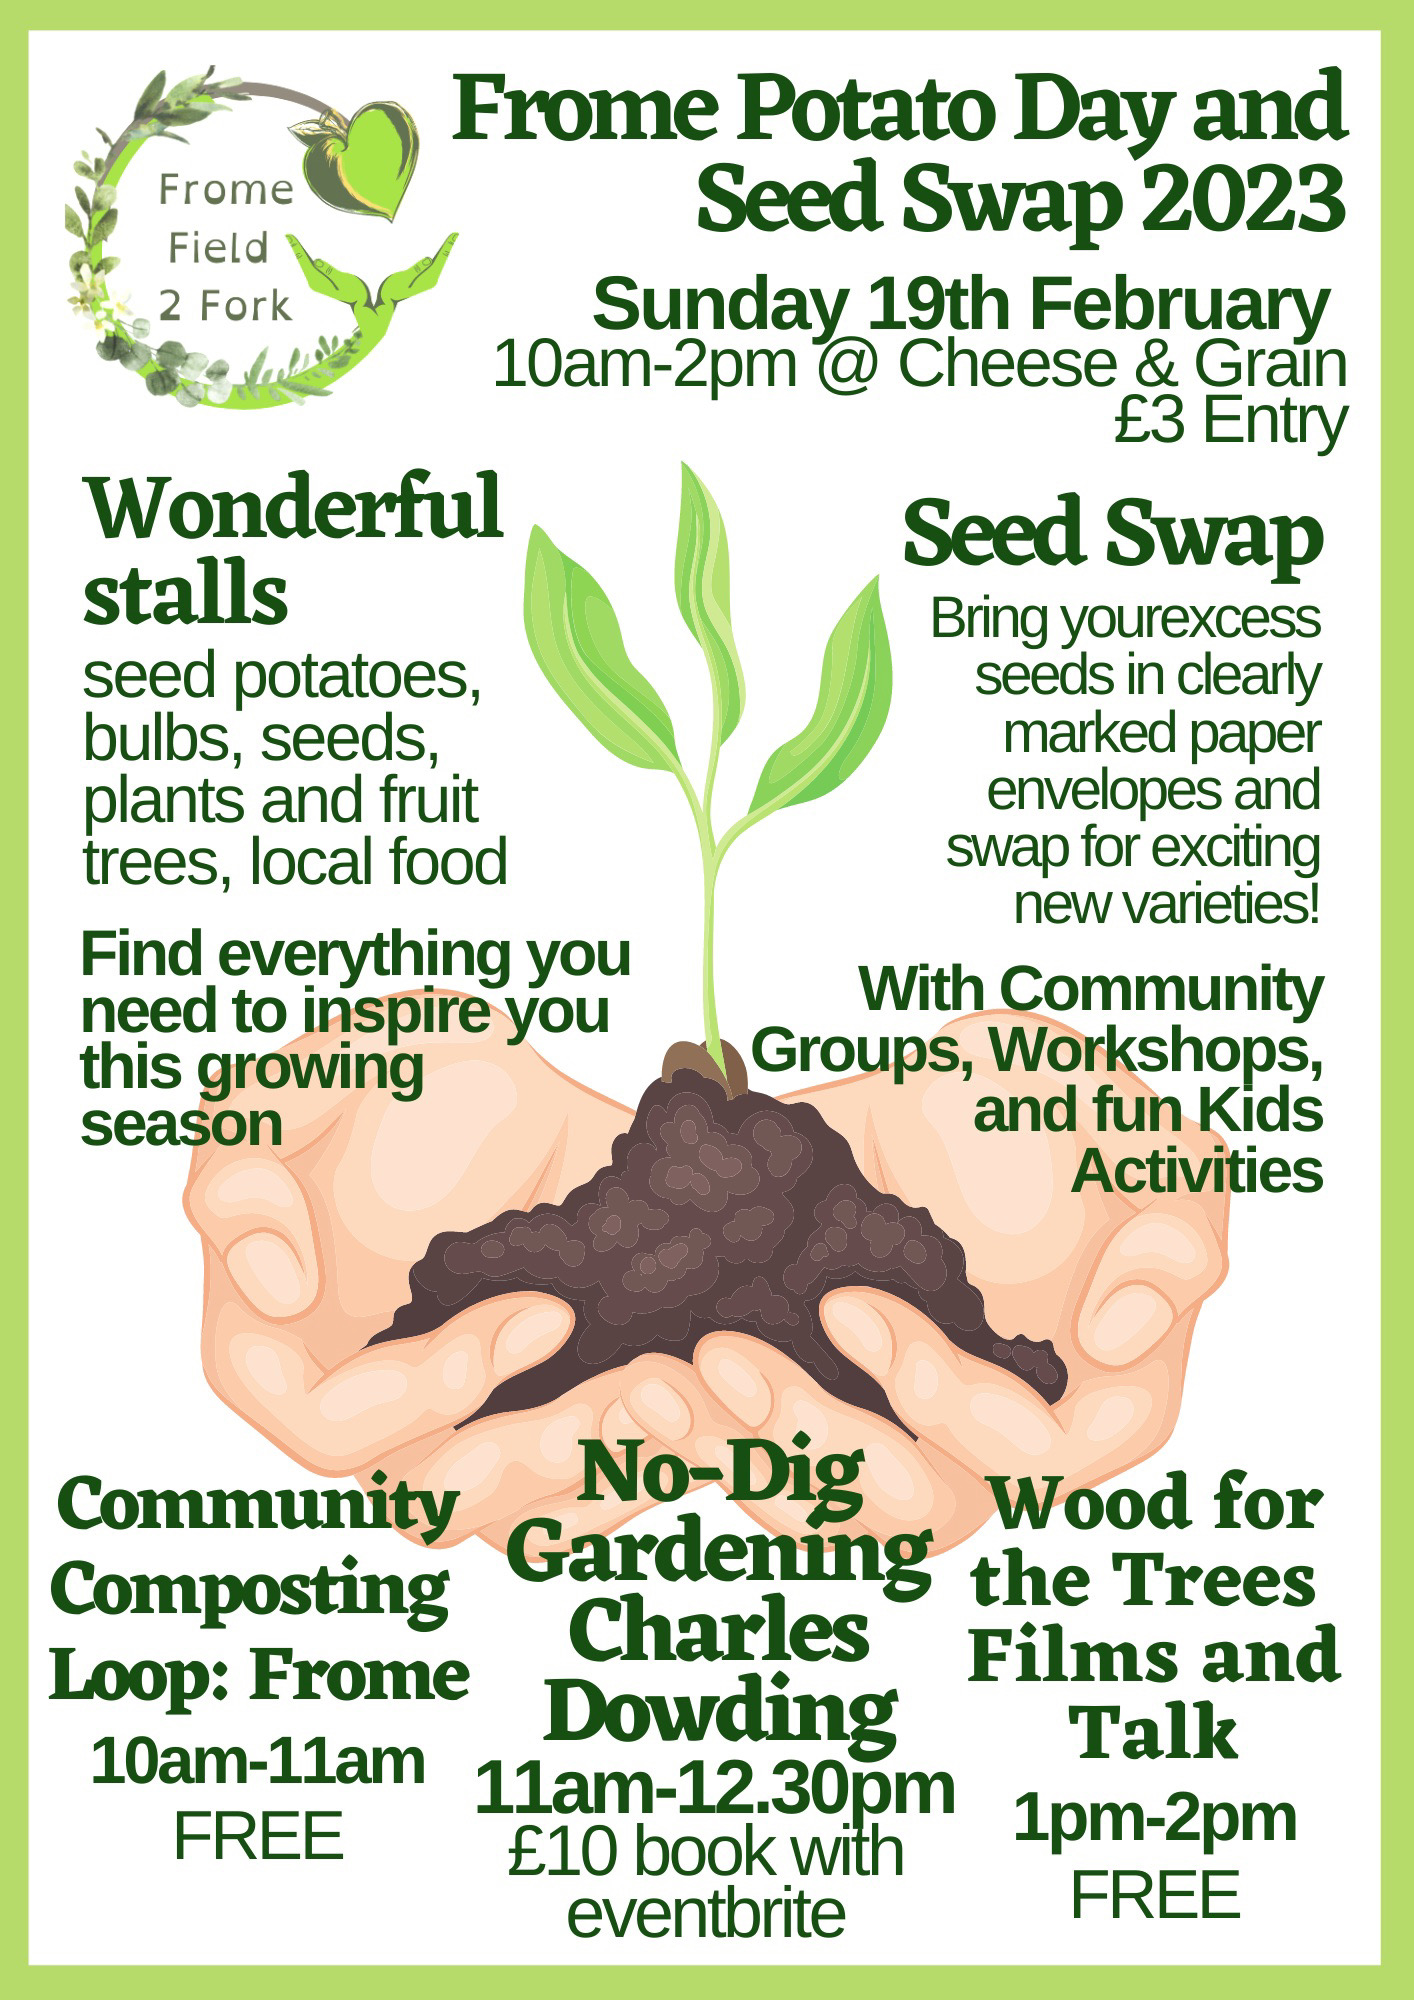 Frome Potato Day and Seed Swap 2023 Discover Frome